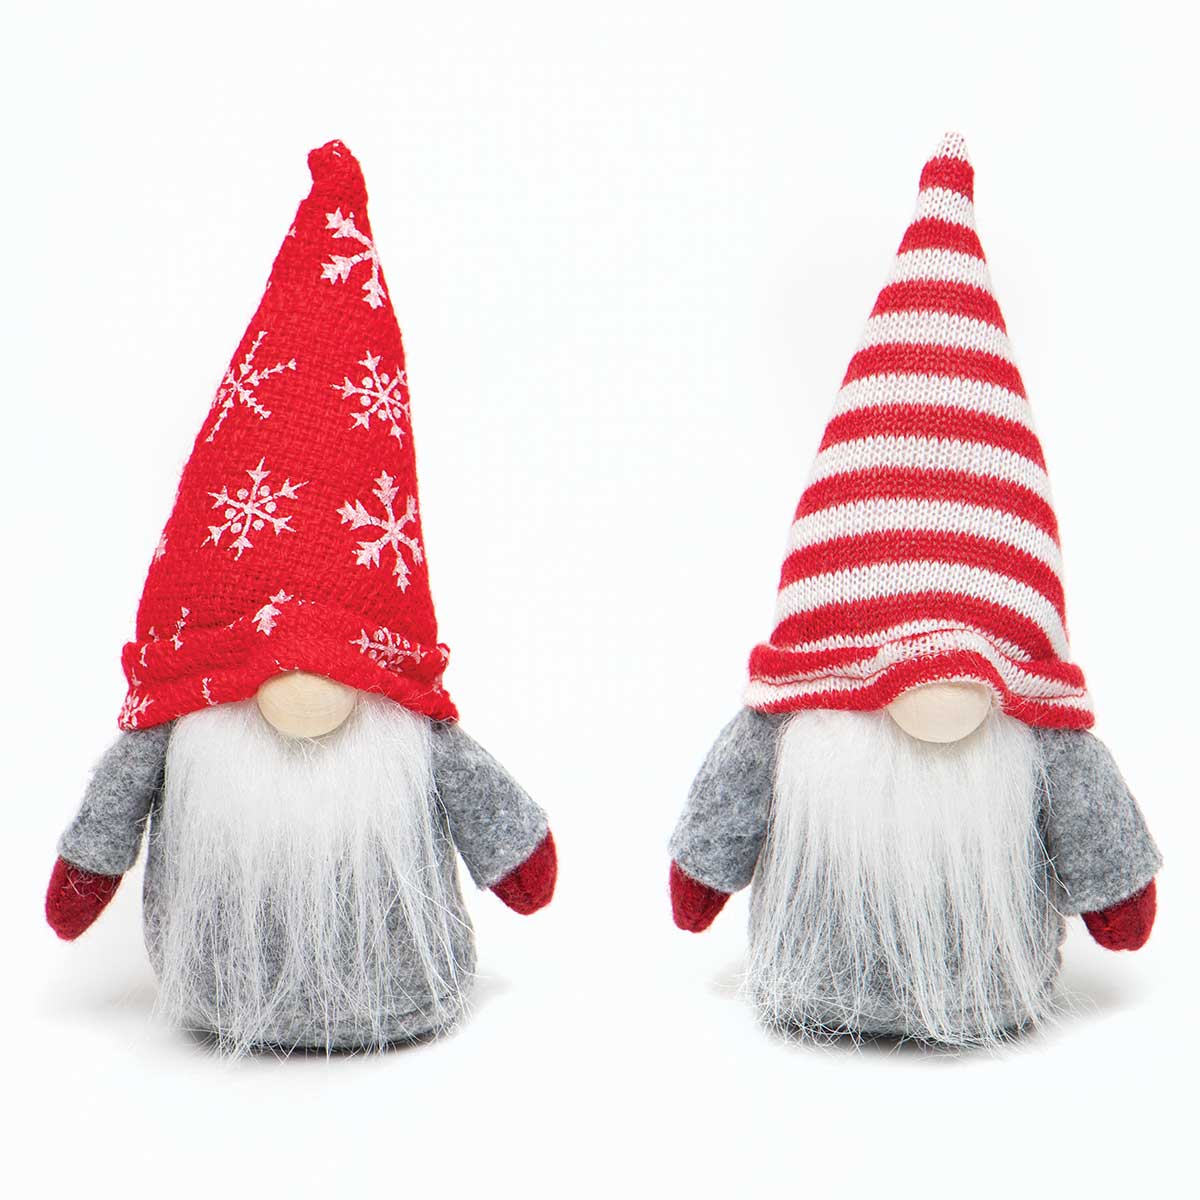 WEE GNOME ORNAMENT RED/WHITE/GREY WITH